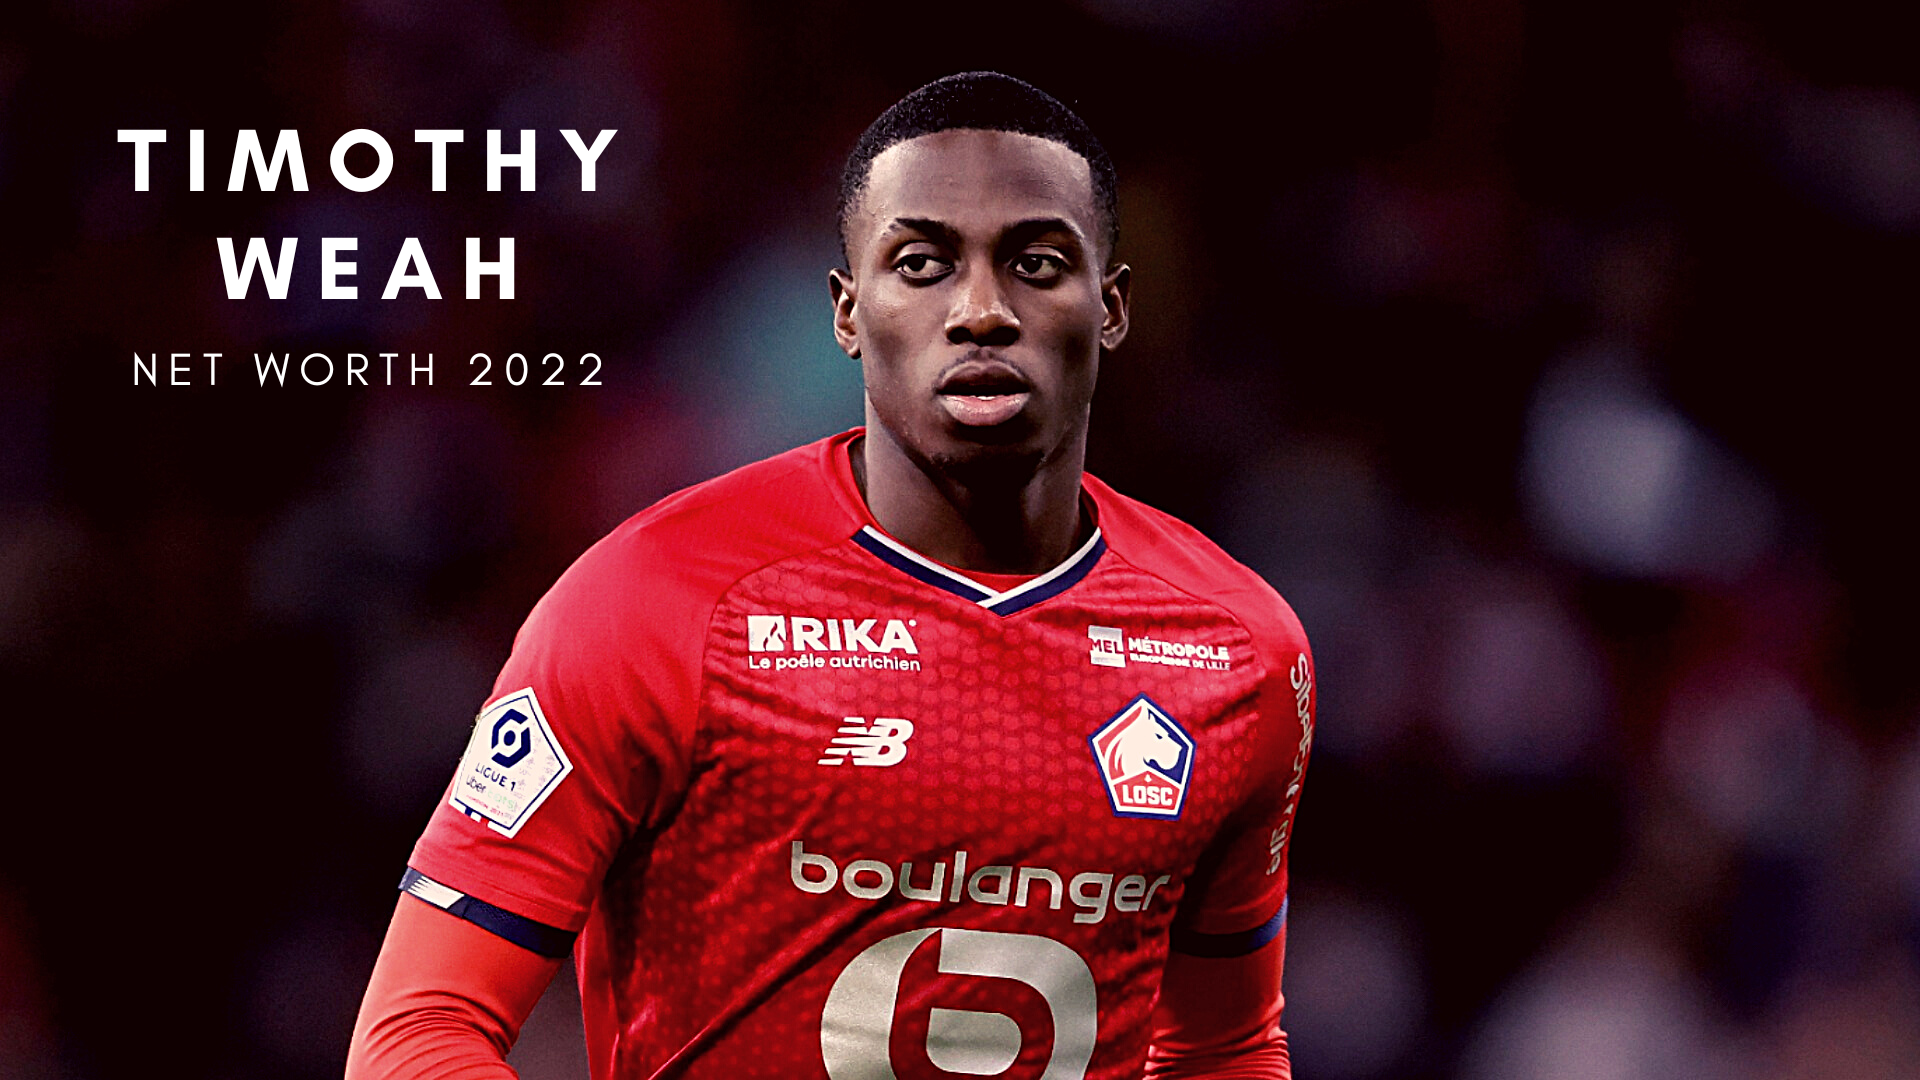 Find out the net worth of Timothy Weah in this article. (Credit: stadiumastro.com)